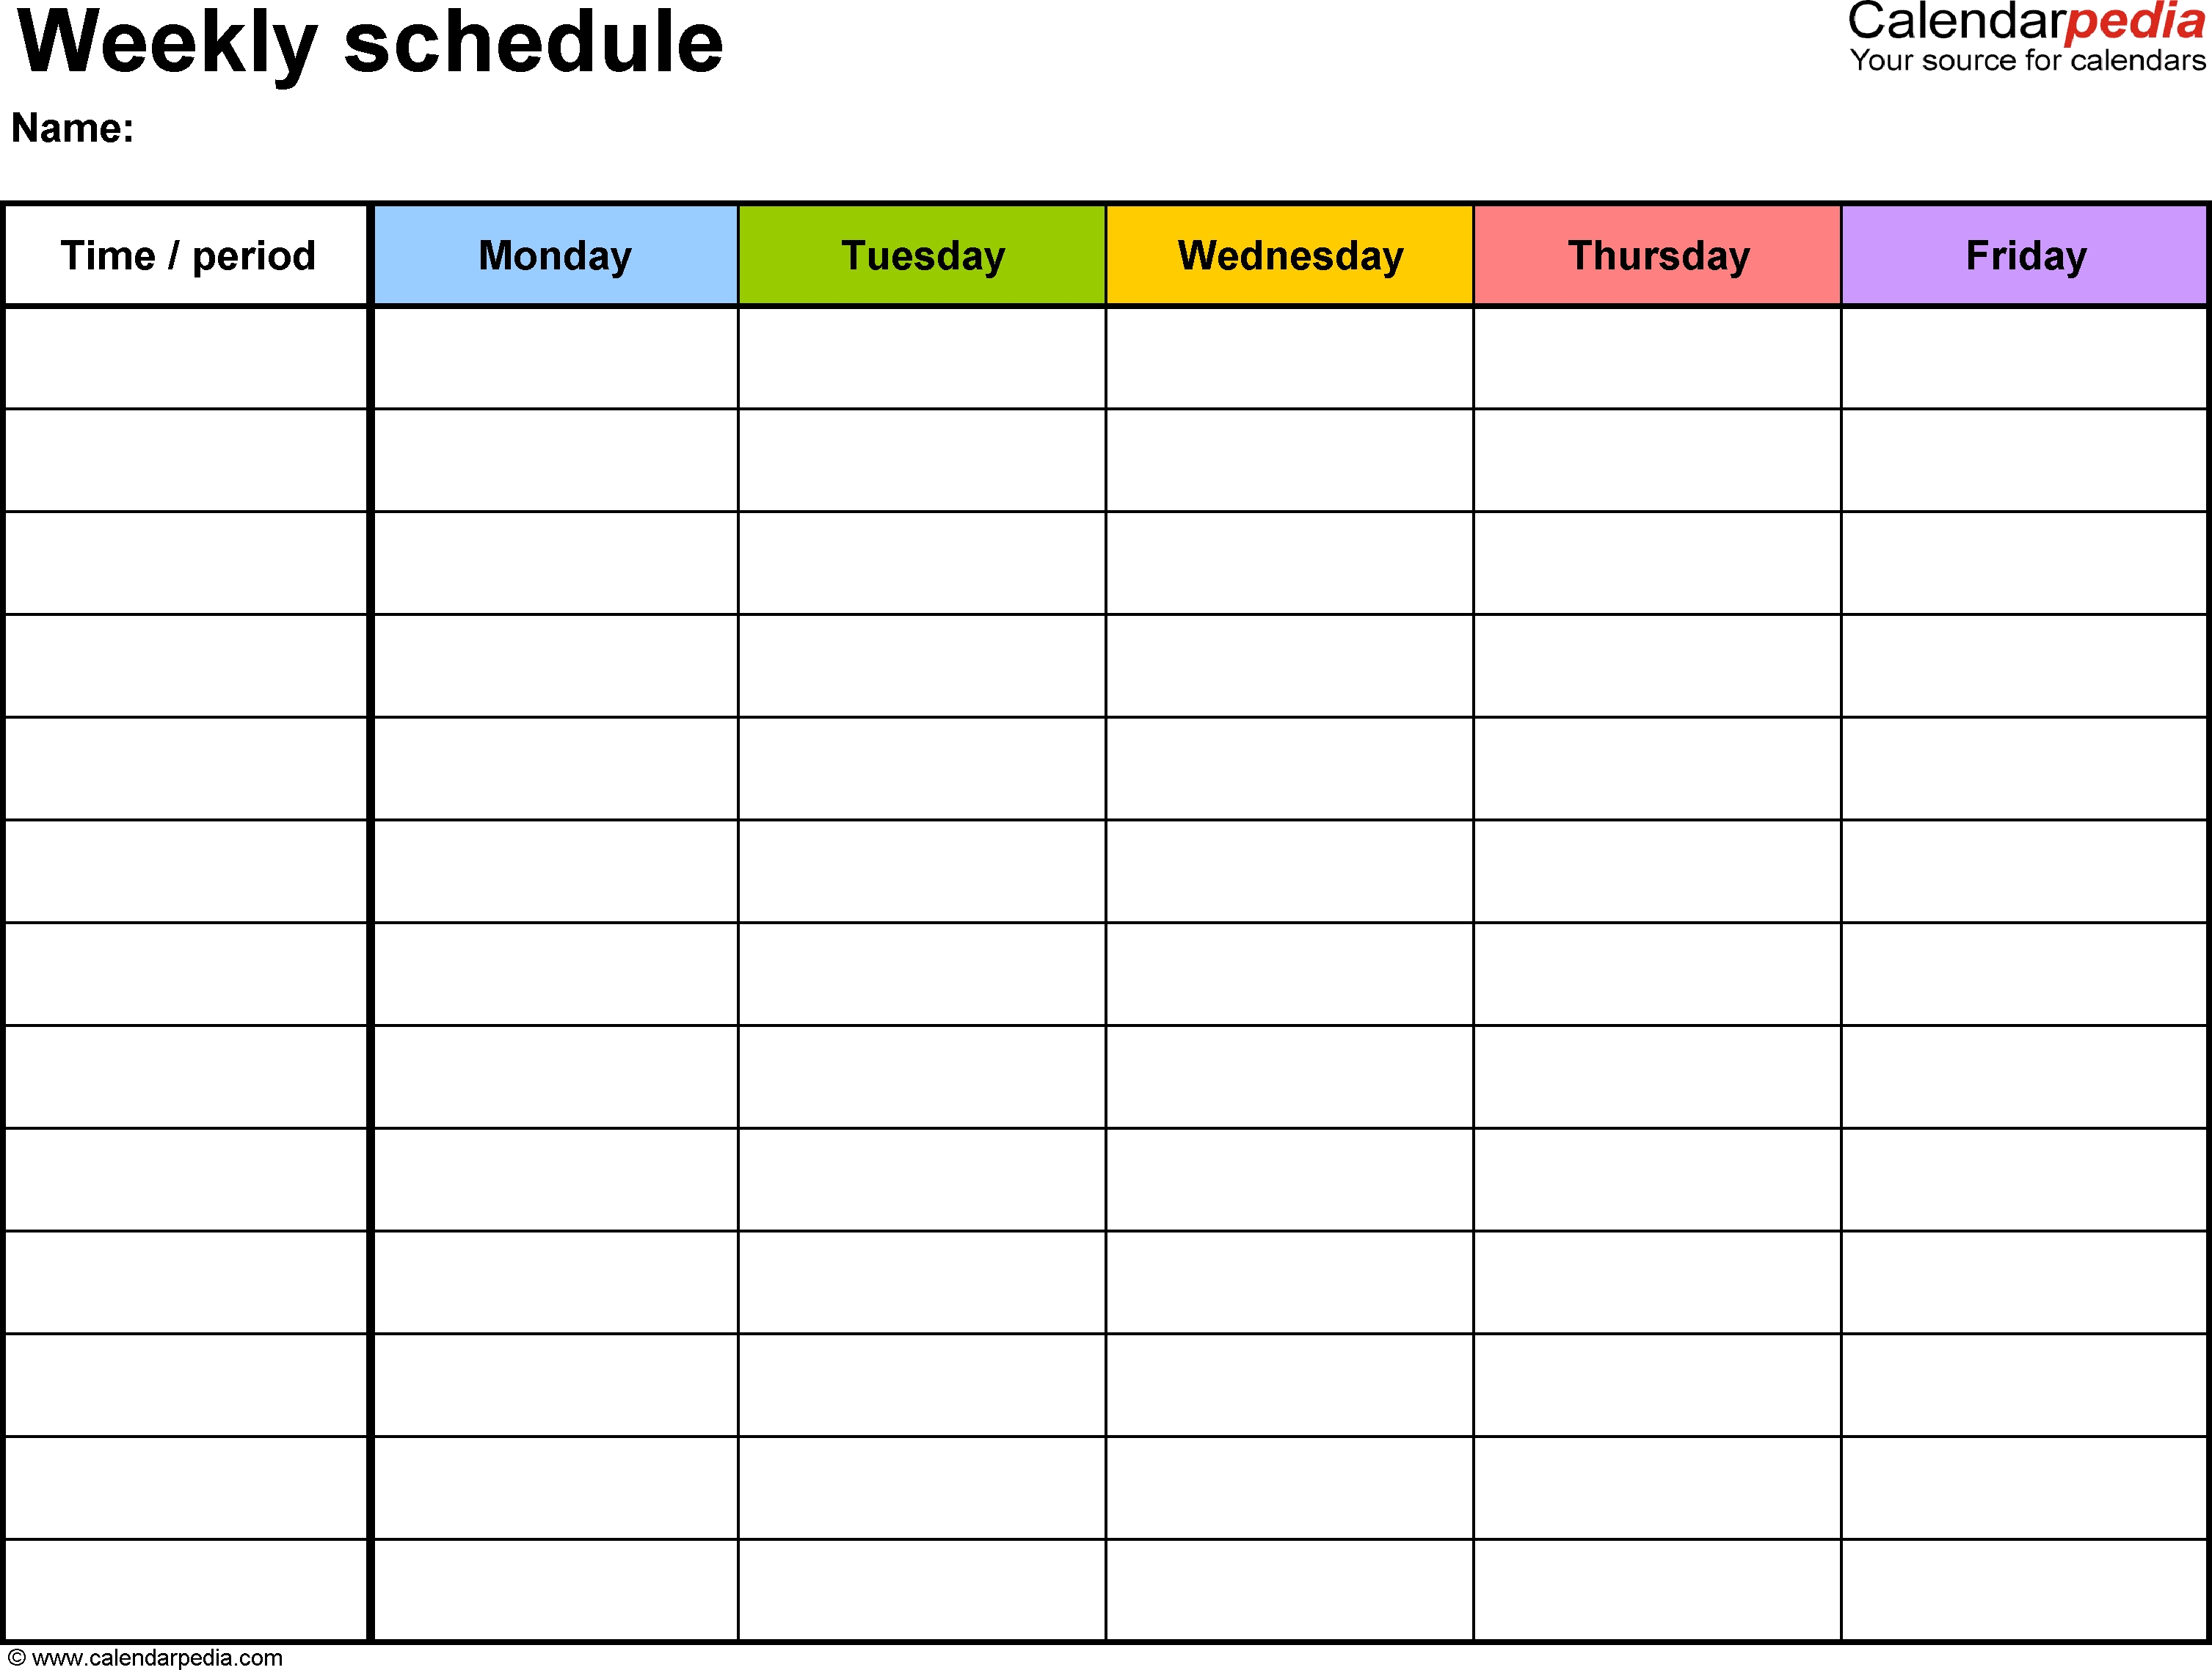 Free Weekly Schedule Templates For Excel - 18 Templates Blank Calendar By Week